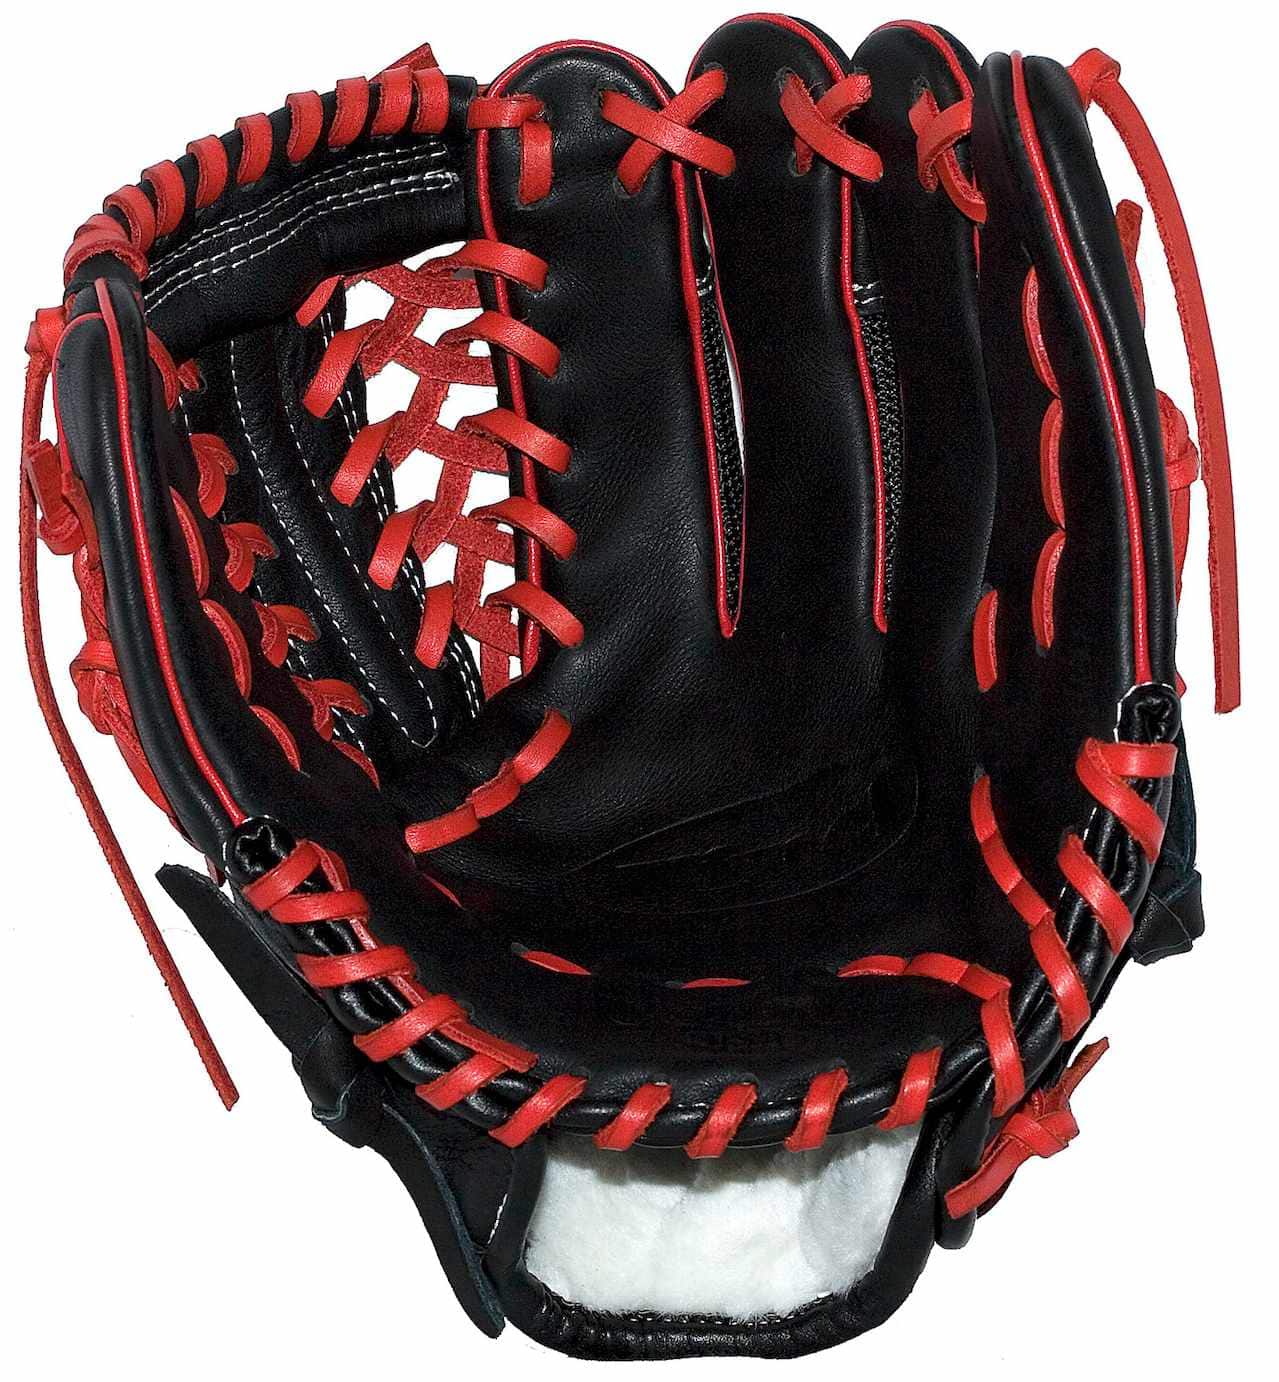 11.5 inch Baseball Glove-JC3333-22 with Black Mesh Back, Red Lace and Red  Welting